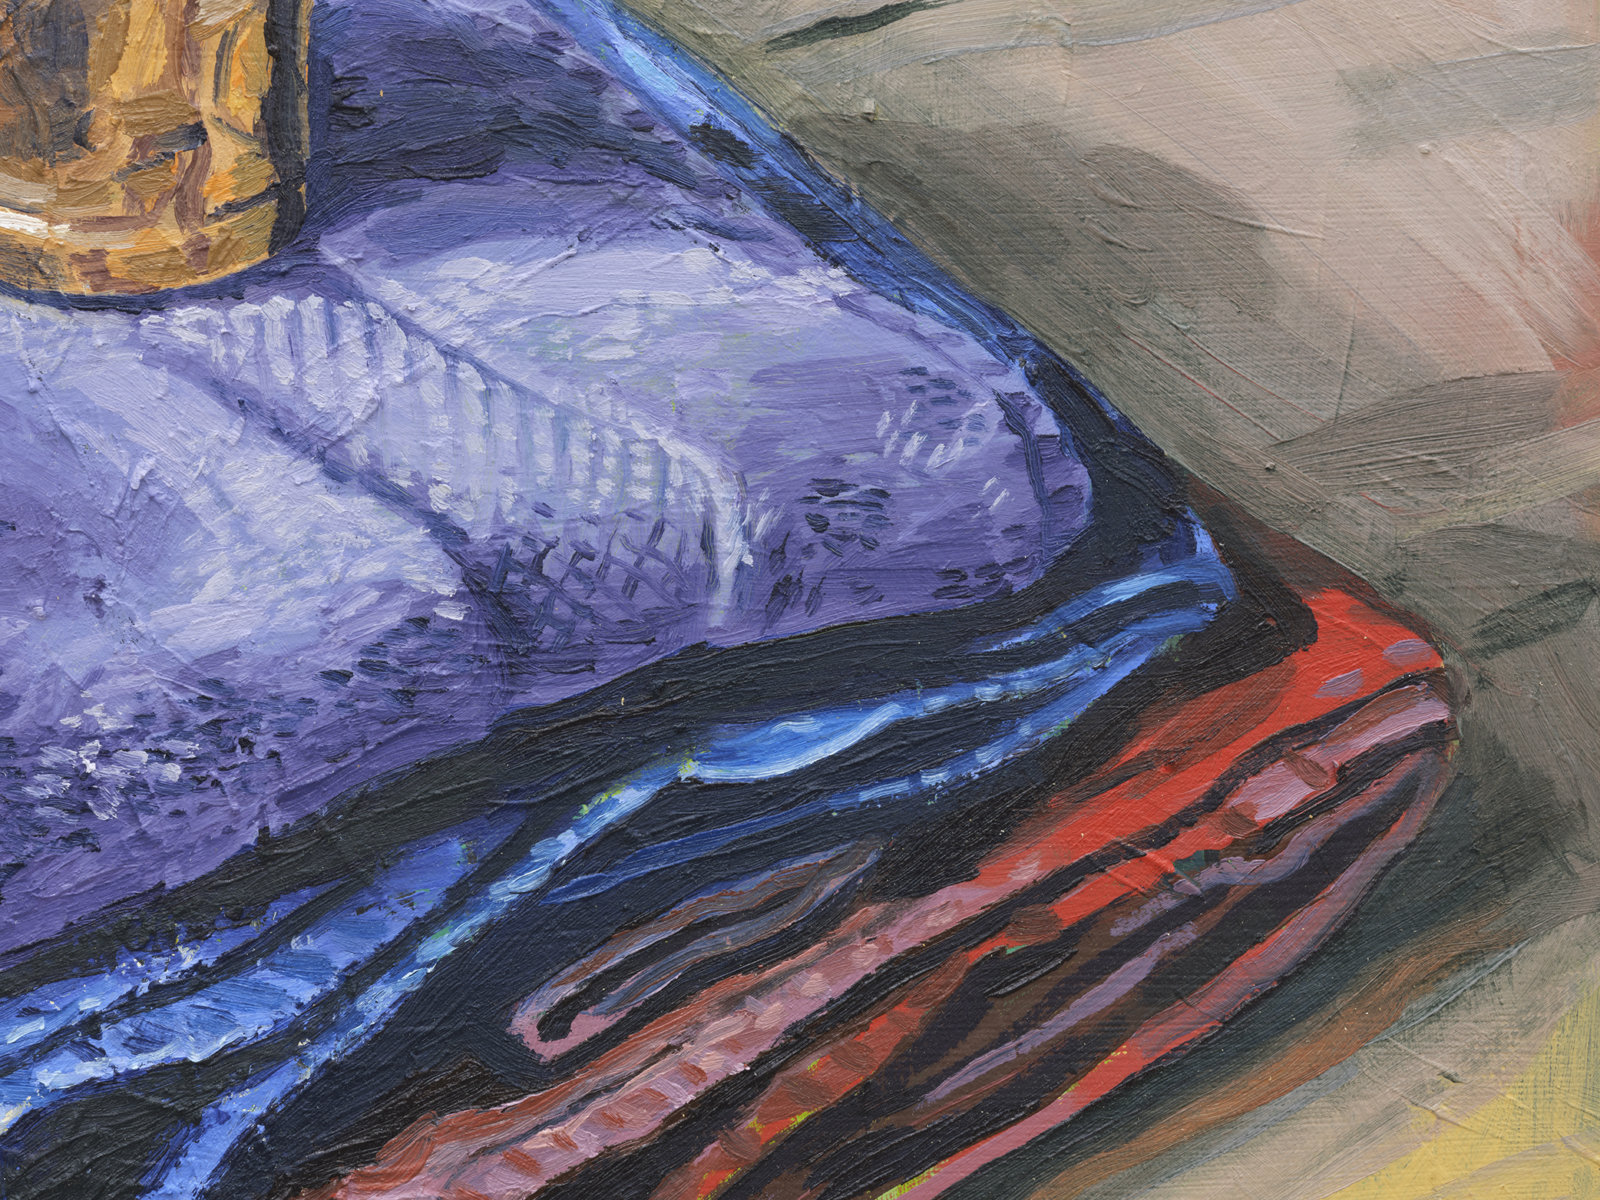 Damian Moppett, Bell and Towels (detail), 2020, oil on canvas, 30 x 27 in. (76 x 69 cm)